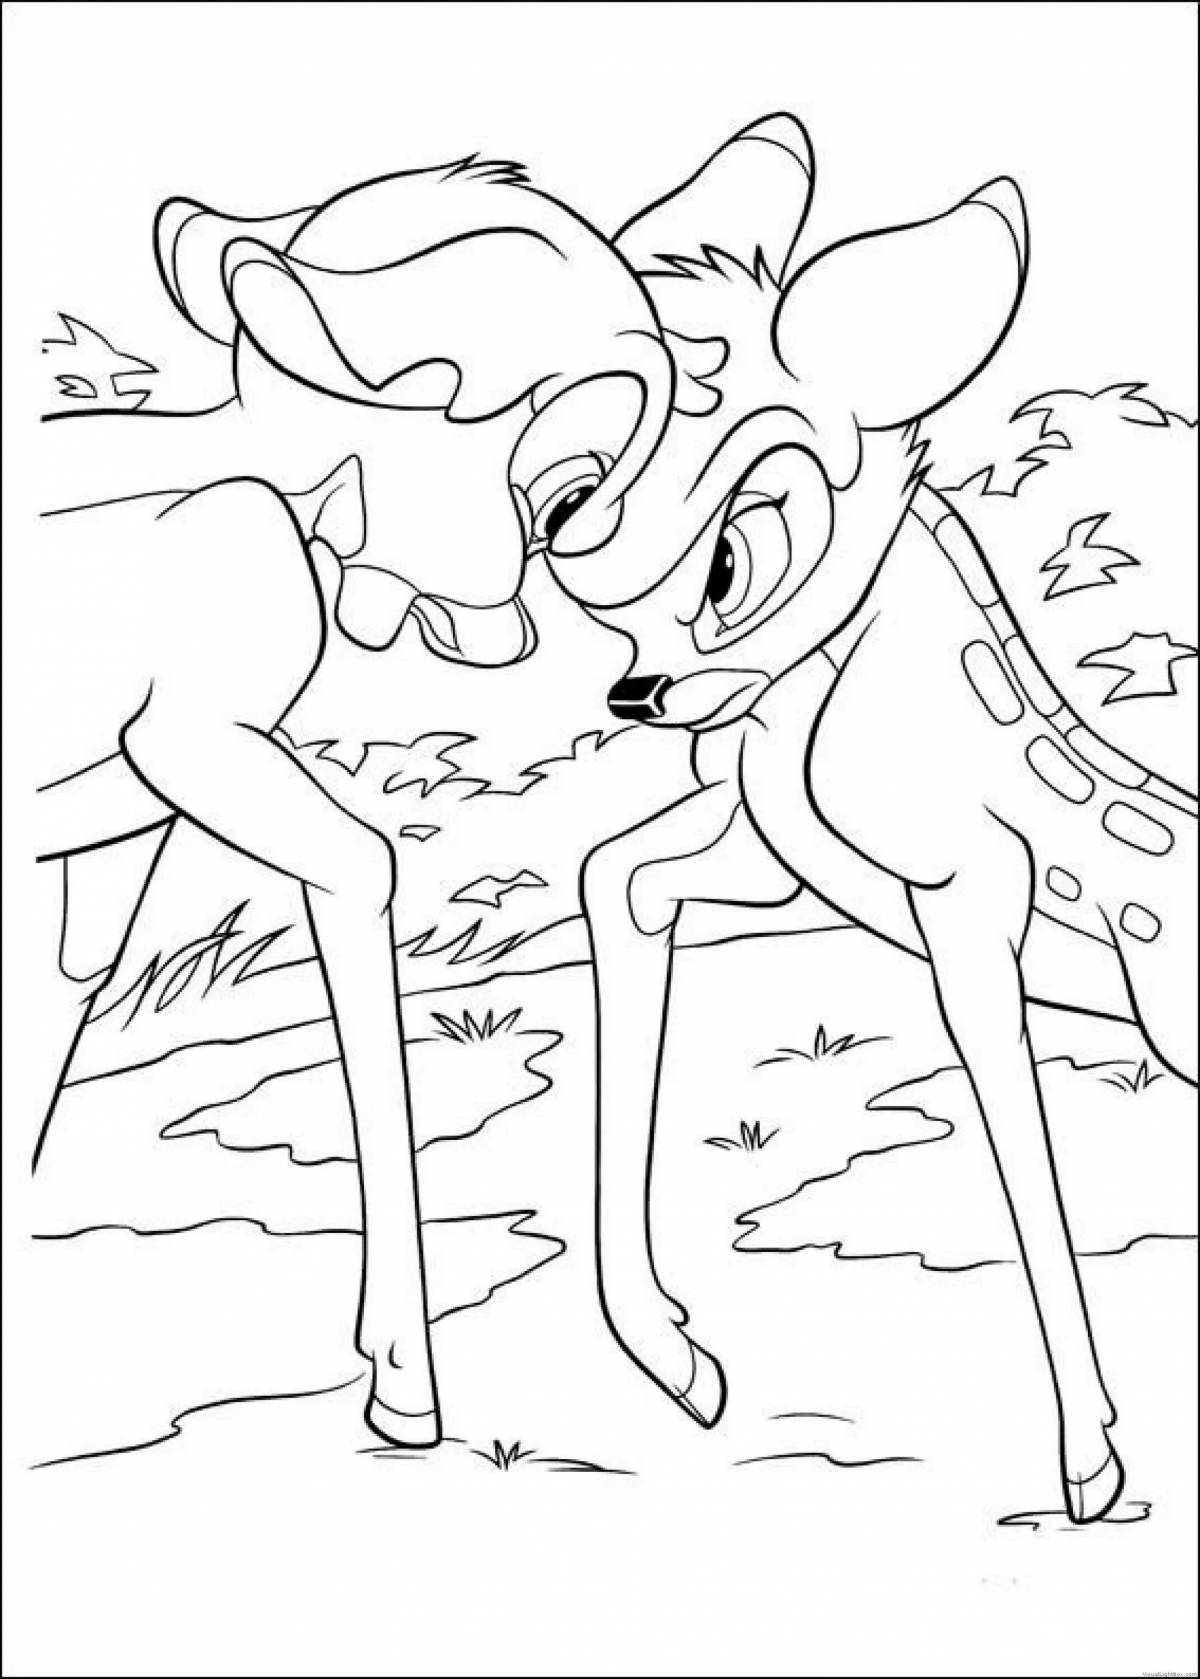 Colorful bambi coloring page 2